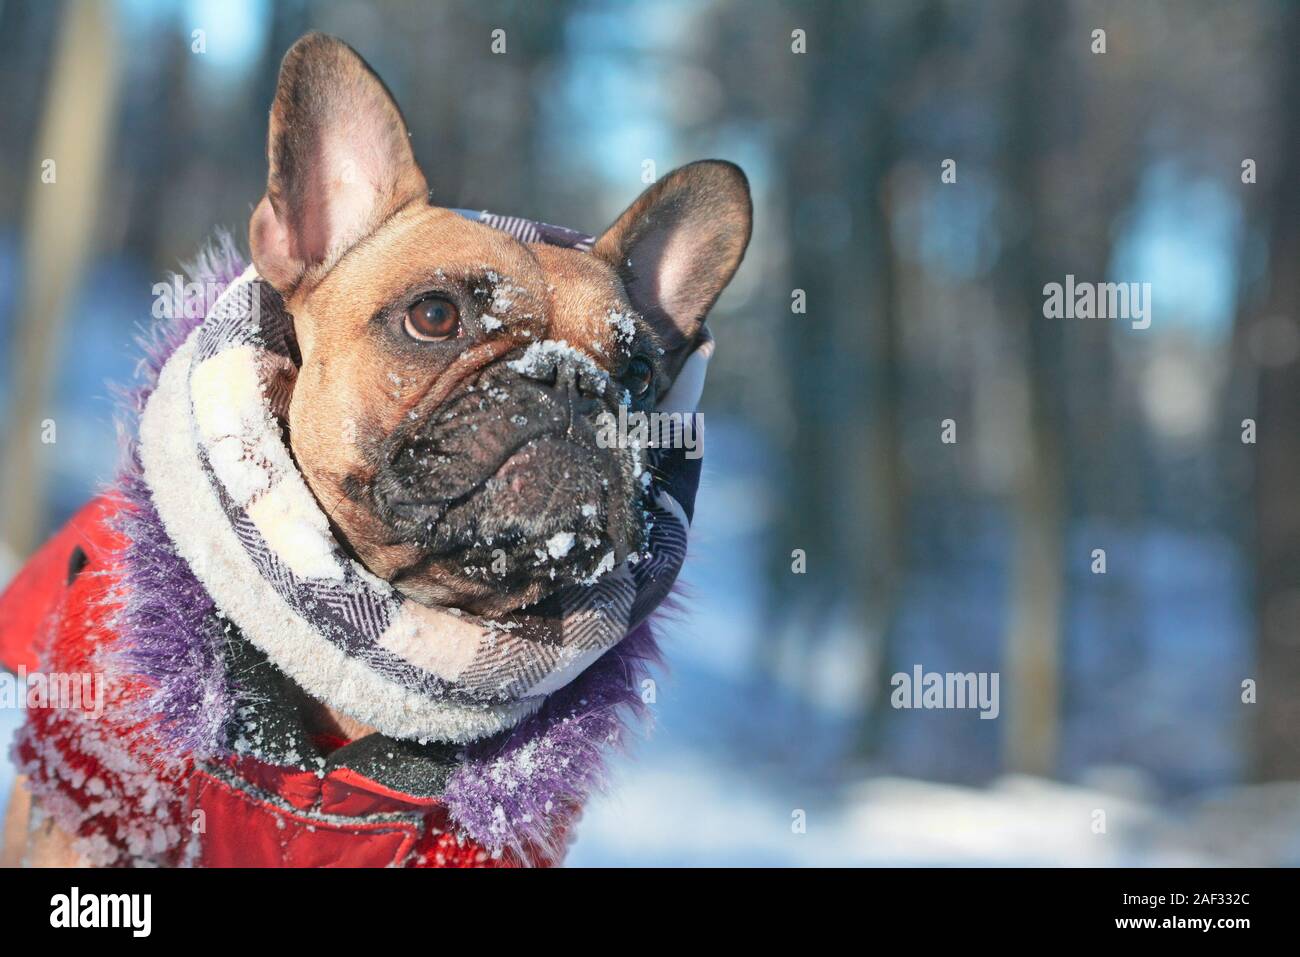 Cute French Bulldog dog with snow on nose wearing warm winter coat with fur collar and scarf in front of blurry winter snow forest landcape background Stock Photo